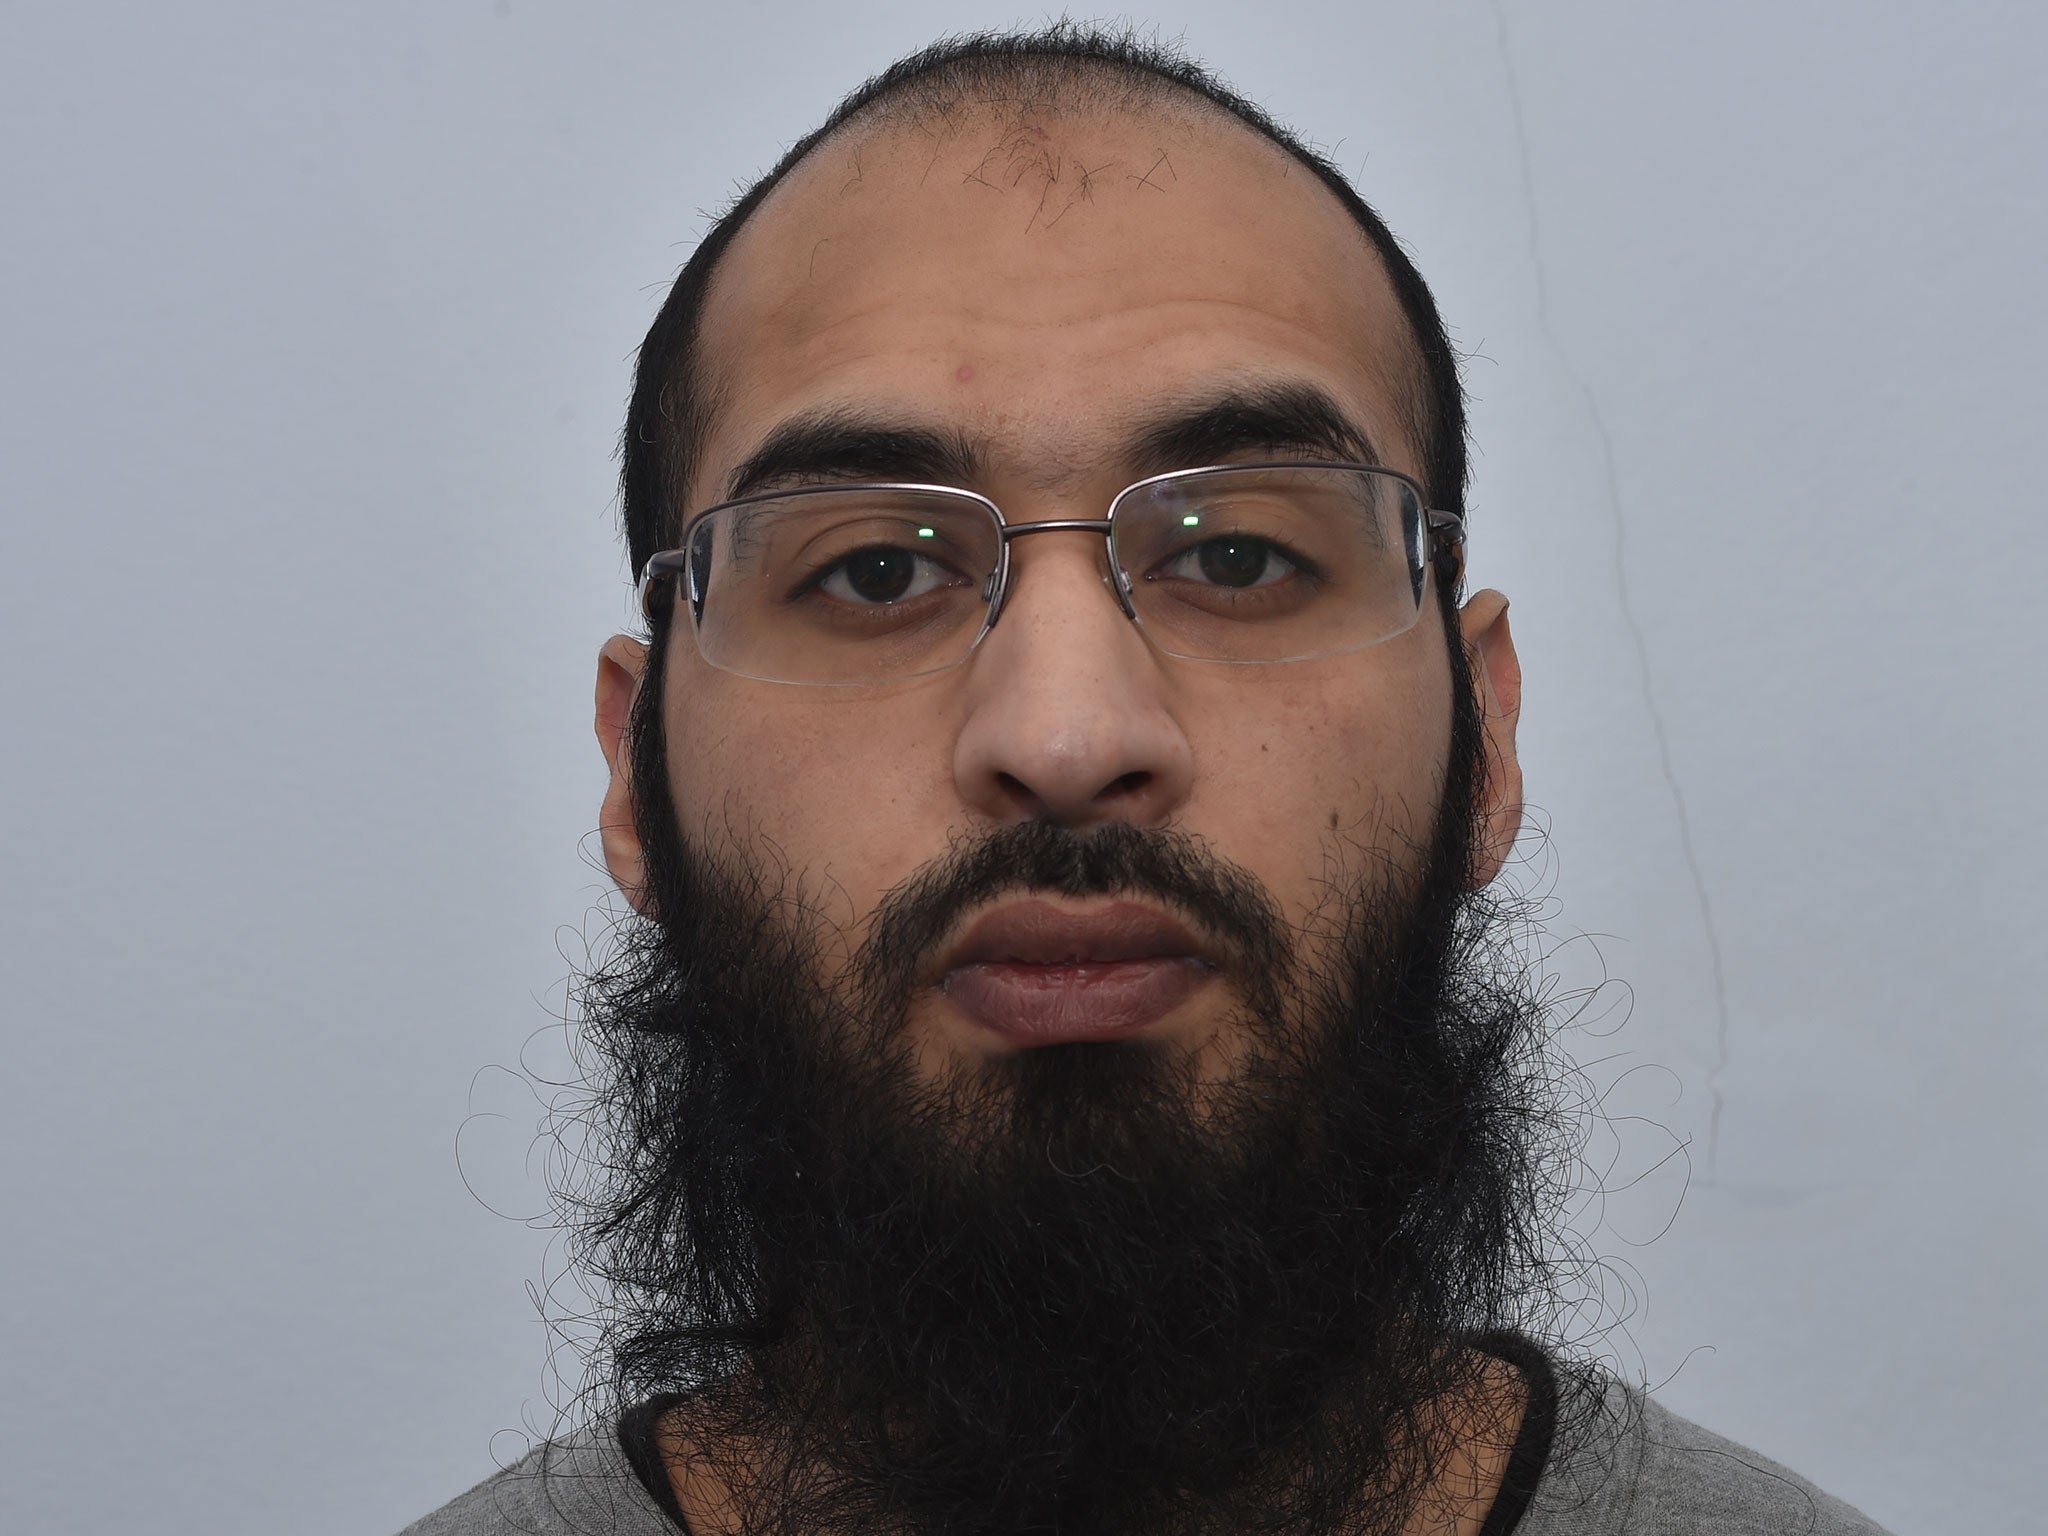 Isis supporter who called for terror attack on Prince George&apos;s school has jail term cut